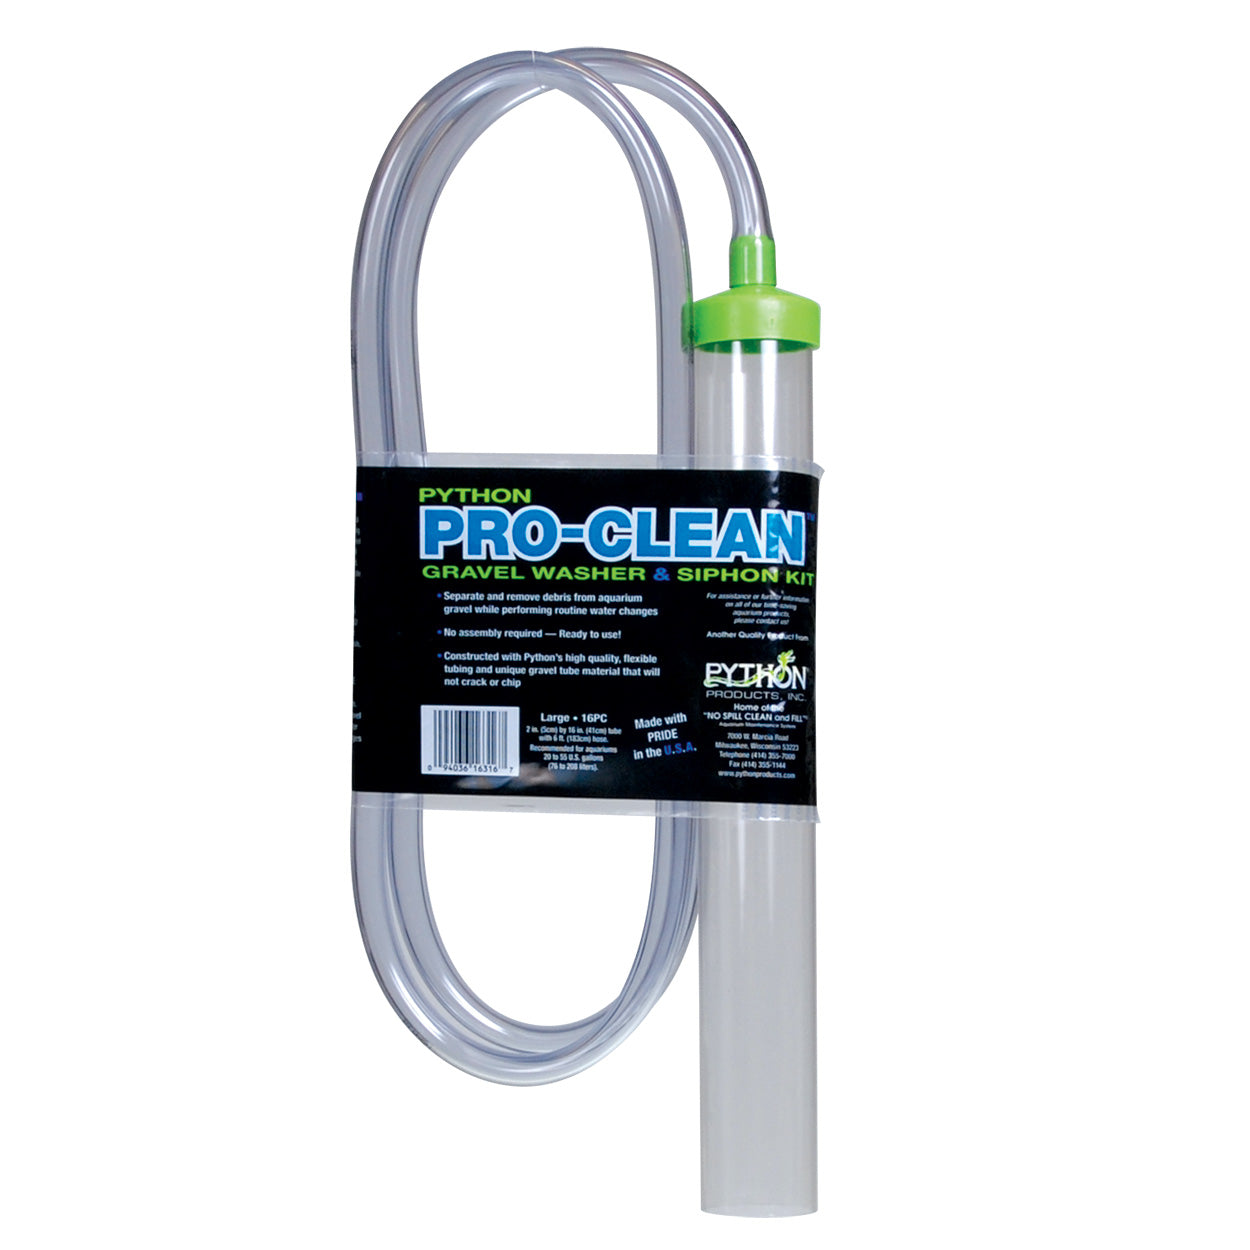 Python Pro Clean Gravel Washer and Siphon Kit